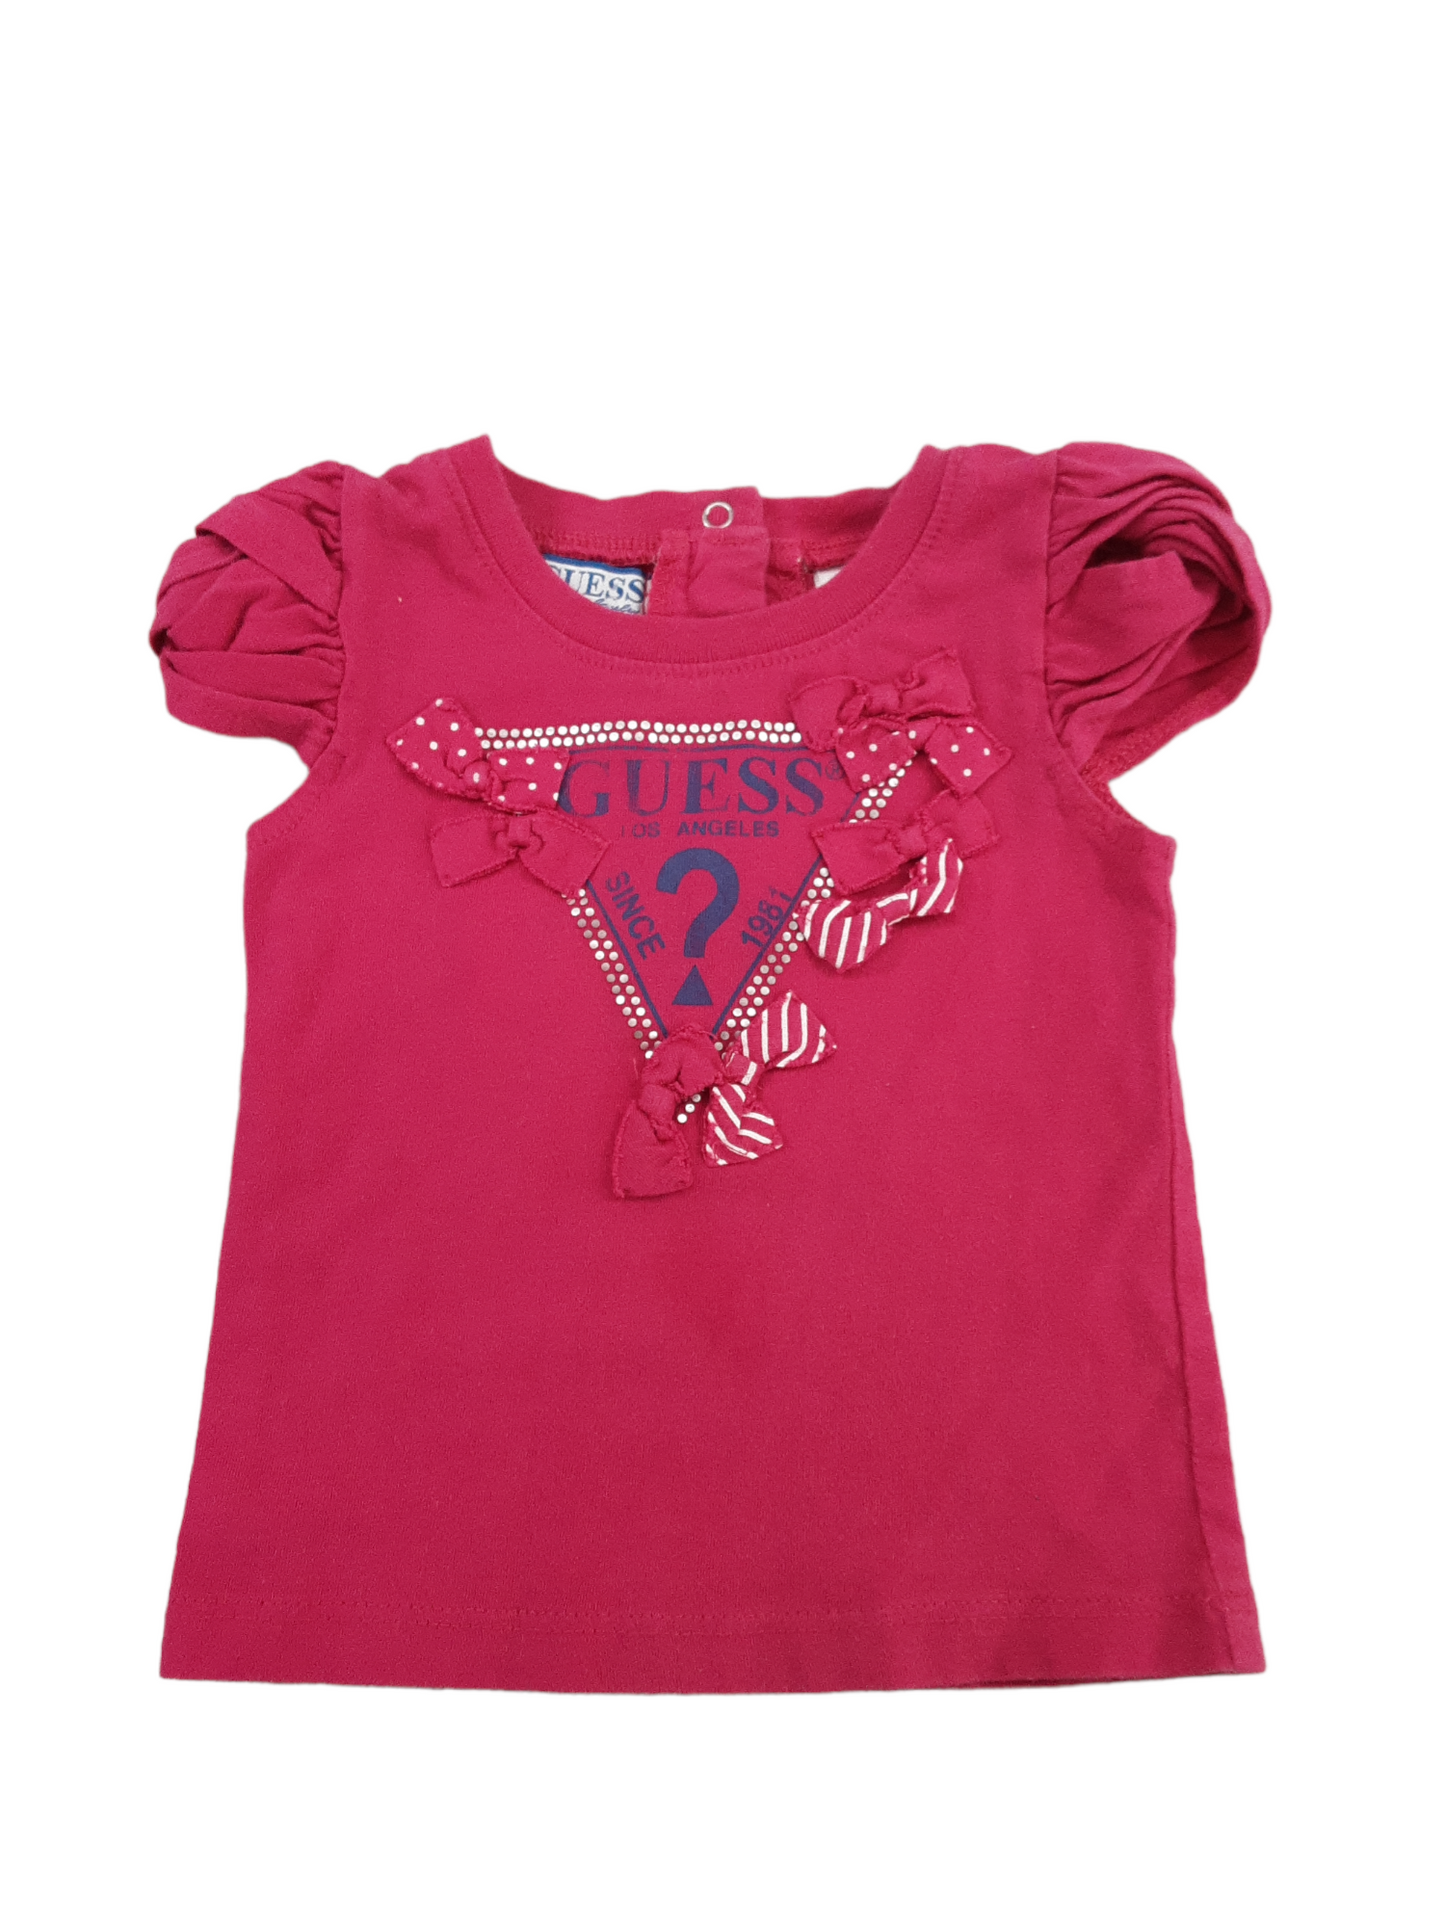 Guess? Top size 12months